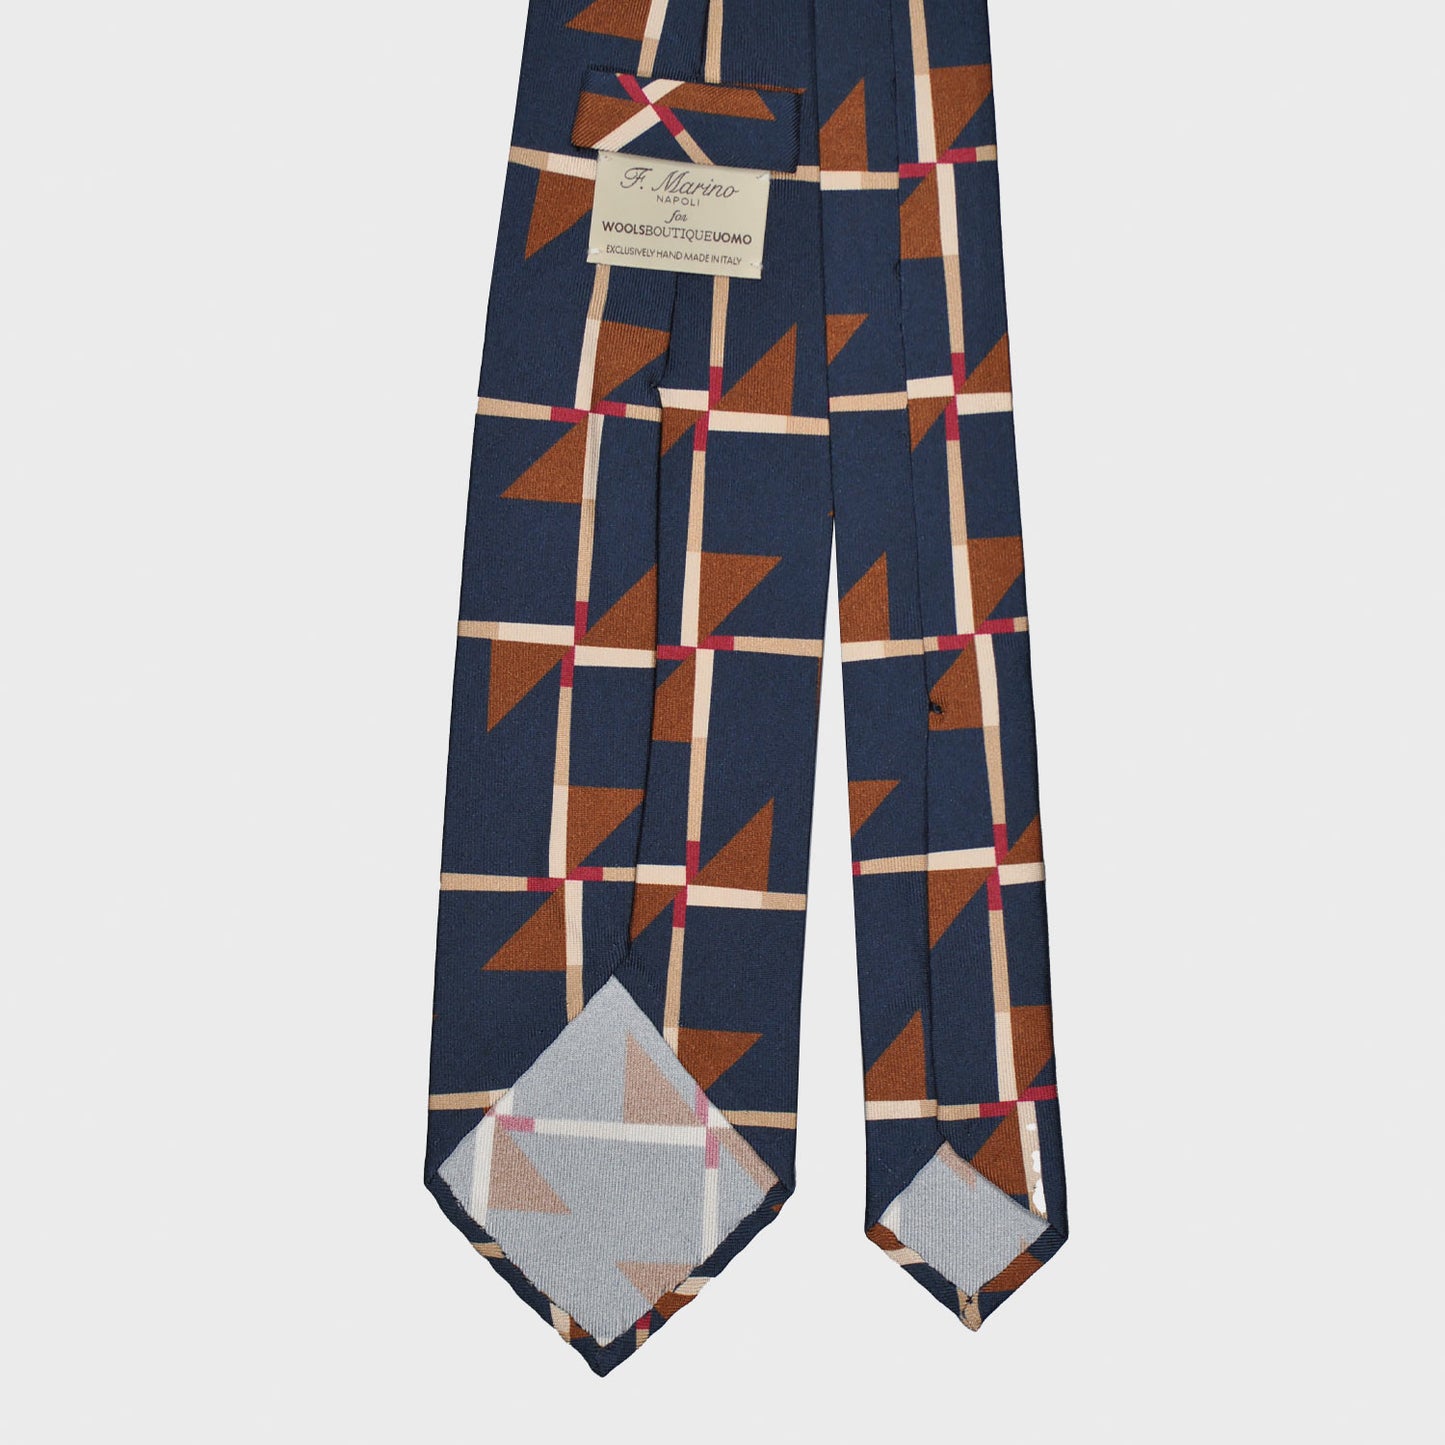 Refined deco tie made with finest Italian silk soft to the touch, cobalt blue background with caramel brown and red Art Decò pattern, unlined tie 3 folds, this Art Deco ties is made with a exclusive pattern made by Wools Boutique Uomo